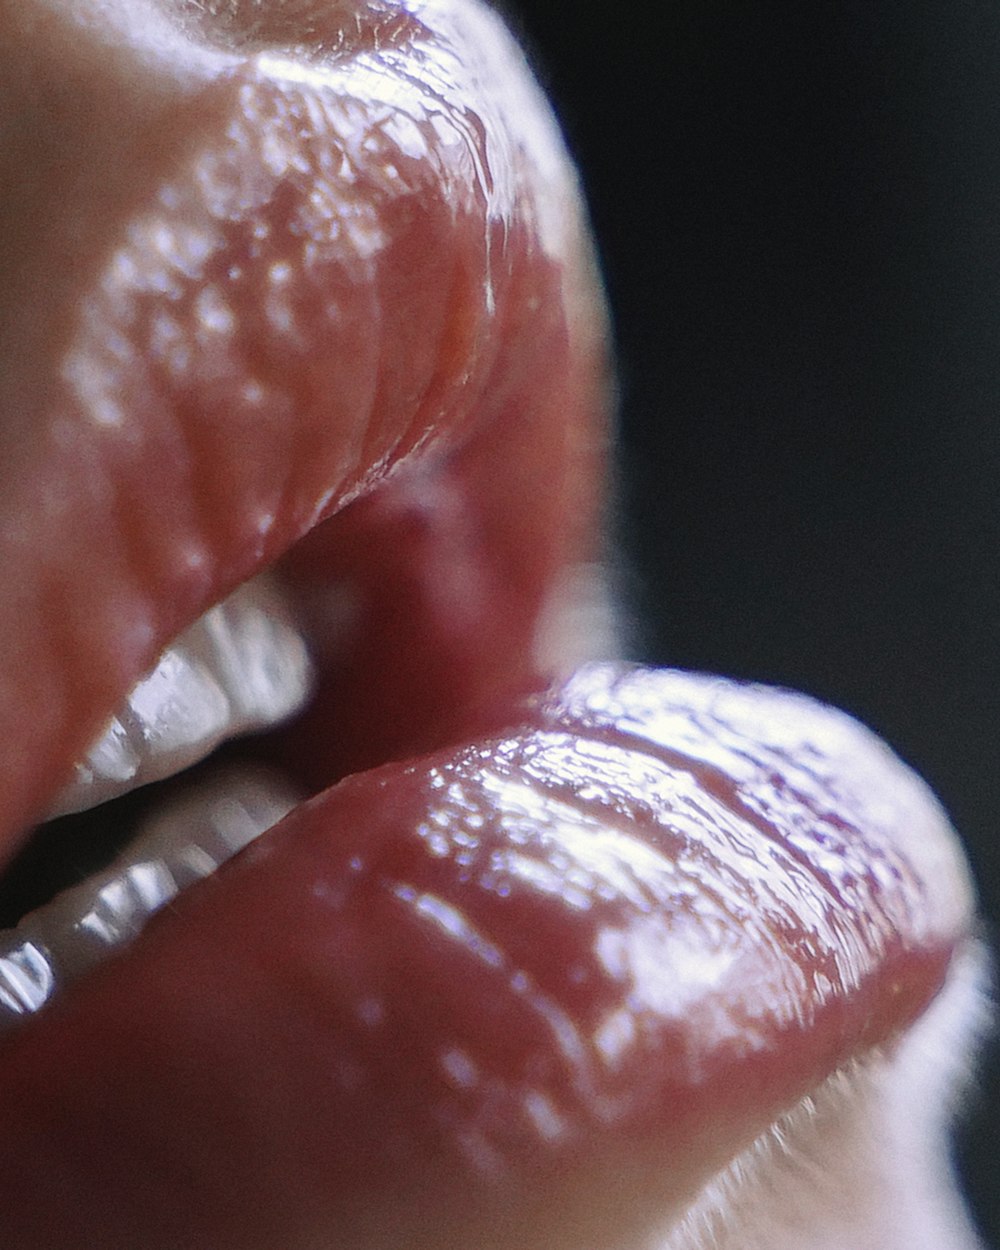 close-up of a person's tongue